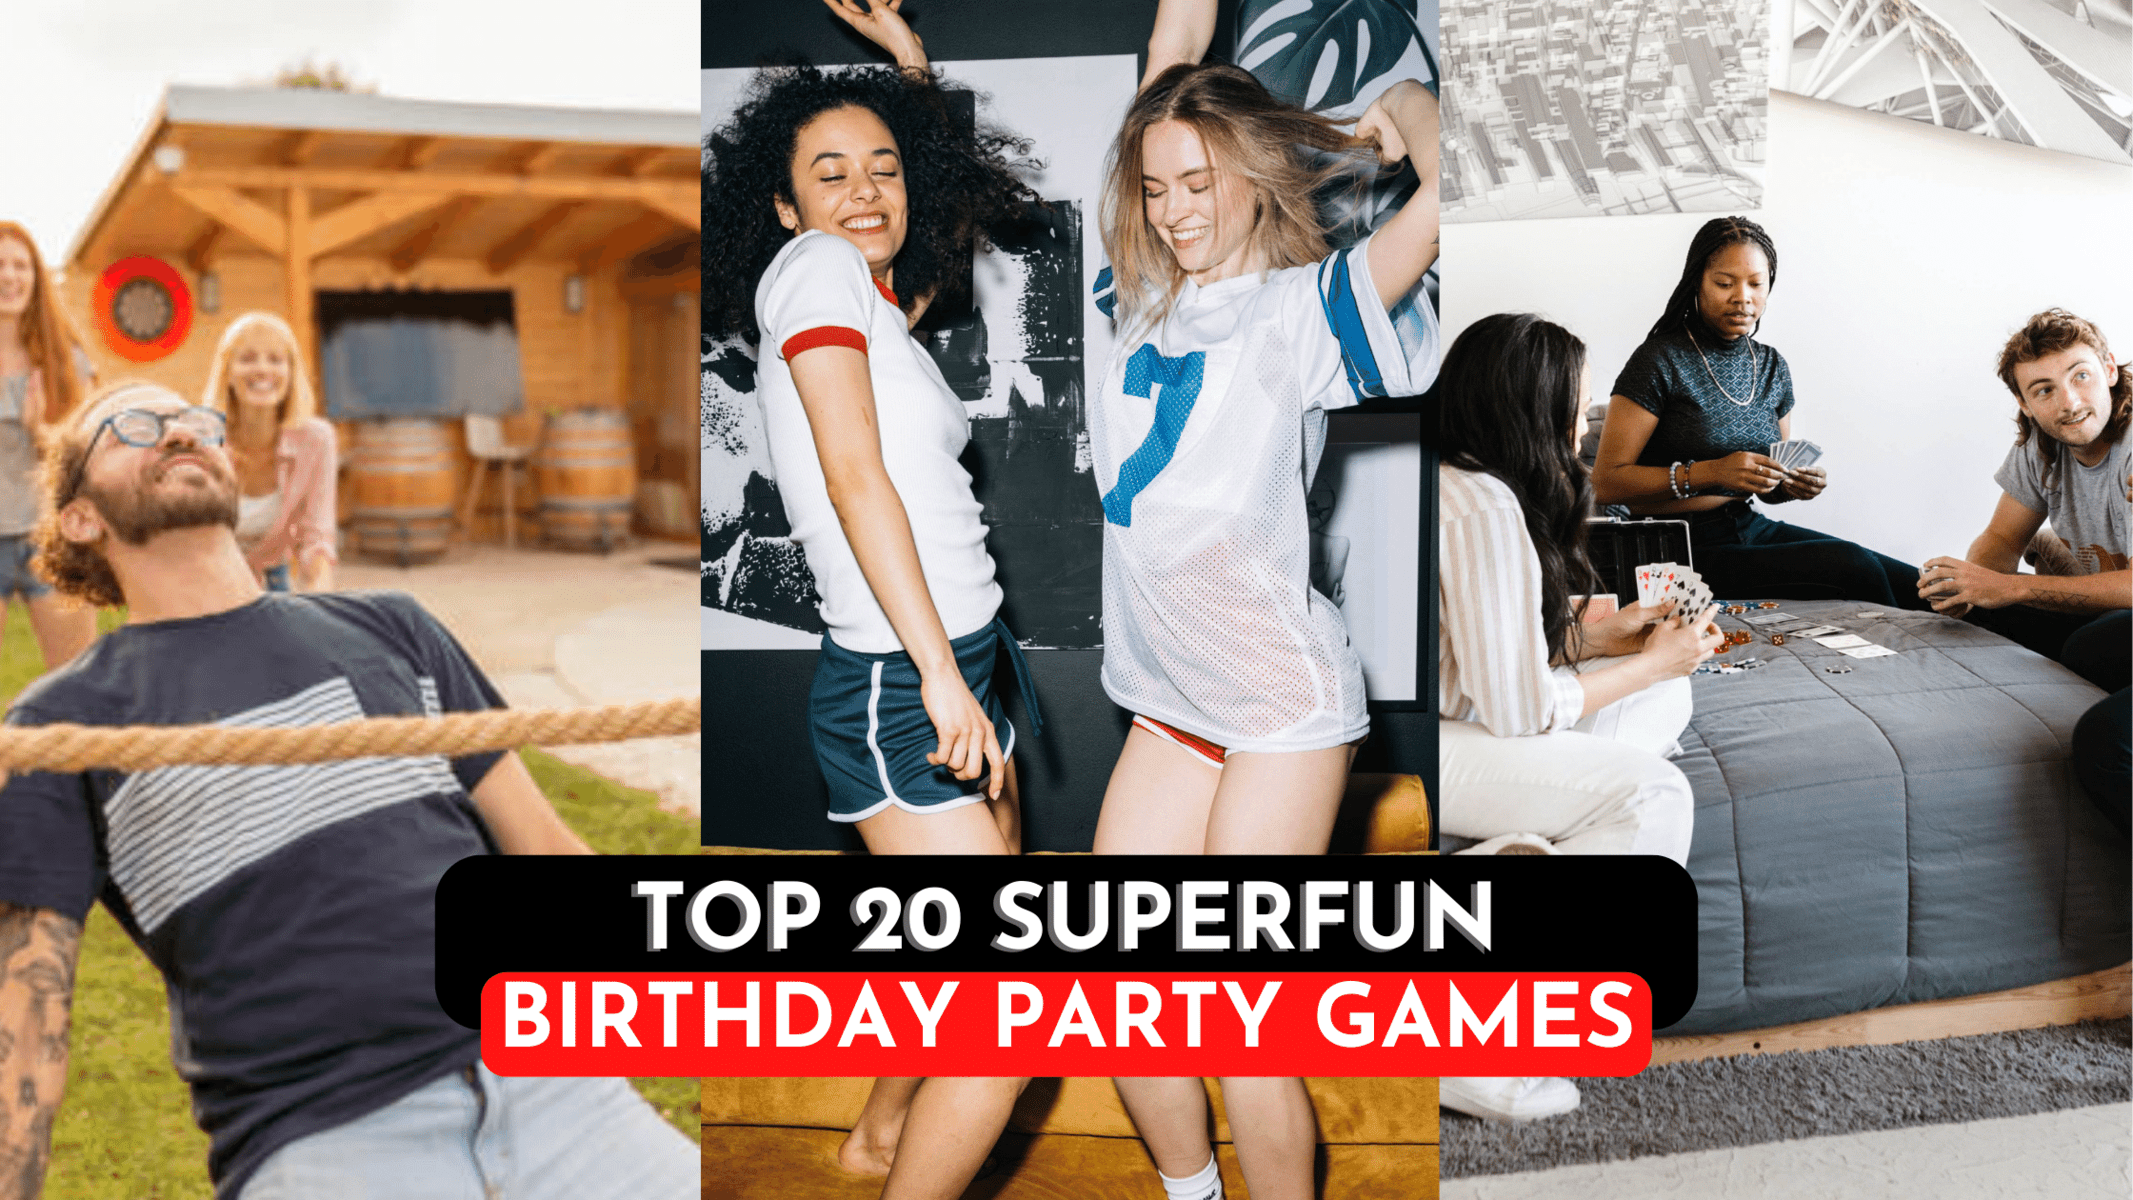 20 Superfun Birthday Party Games to play with your Family N Friends